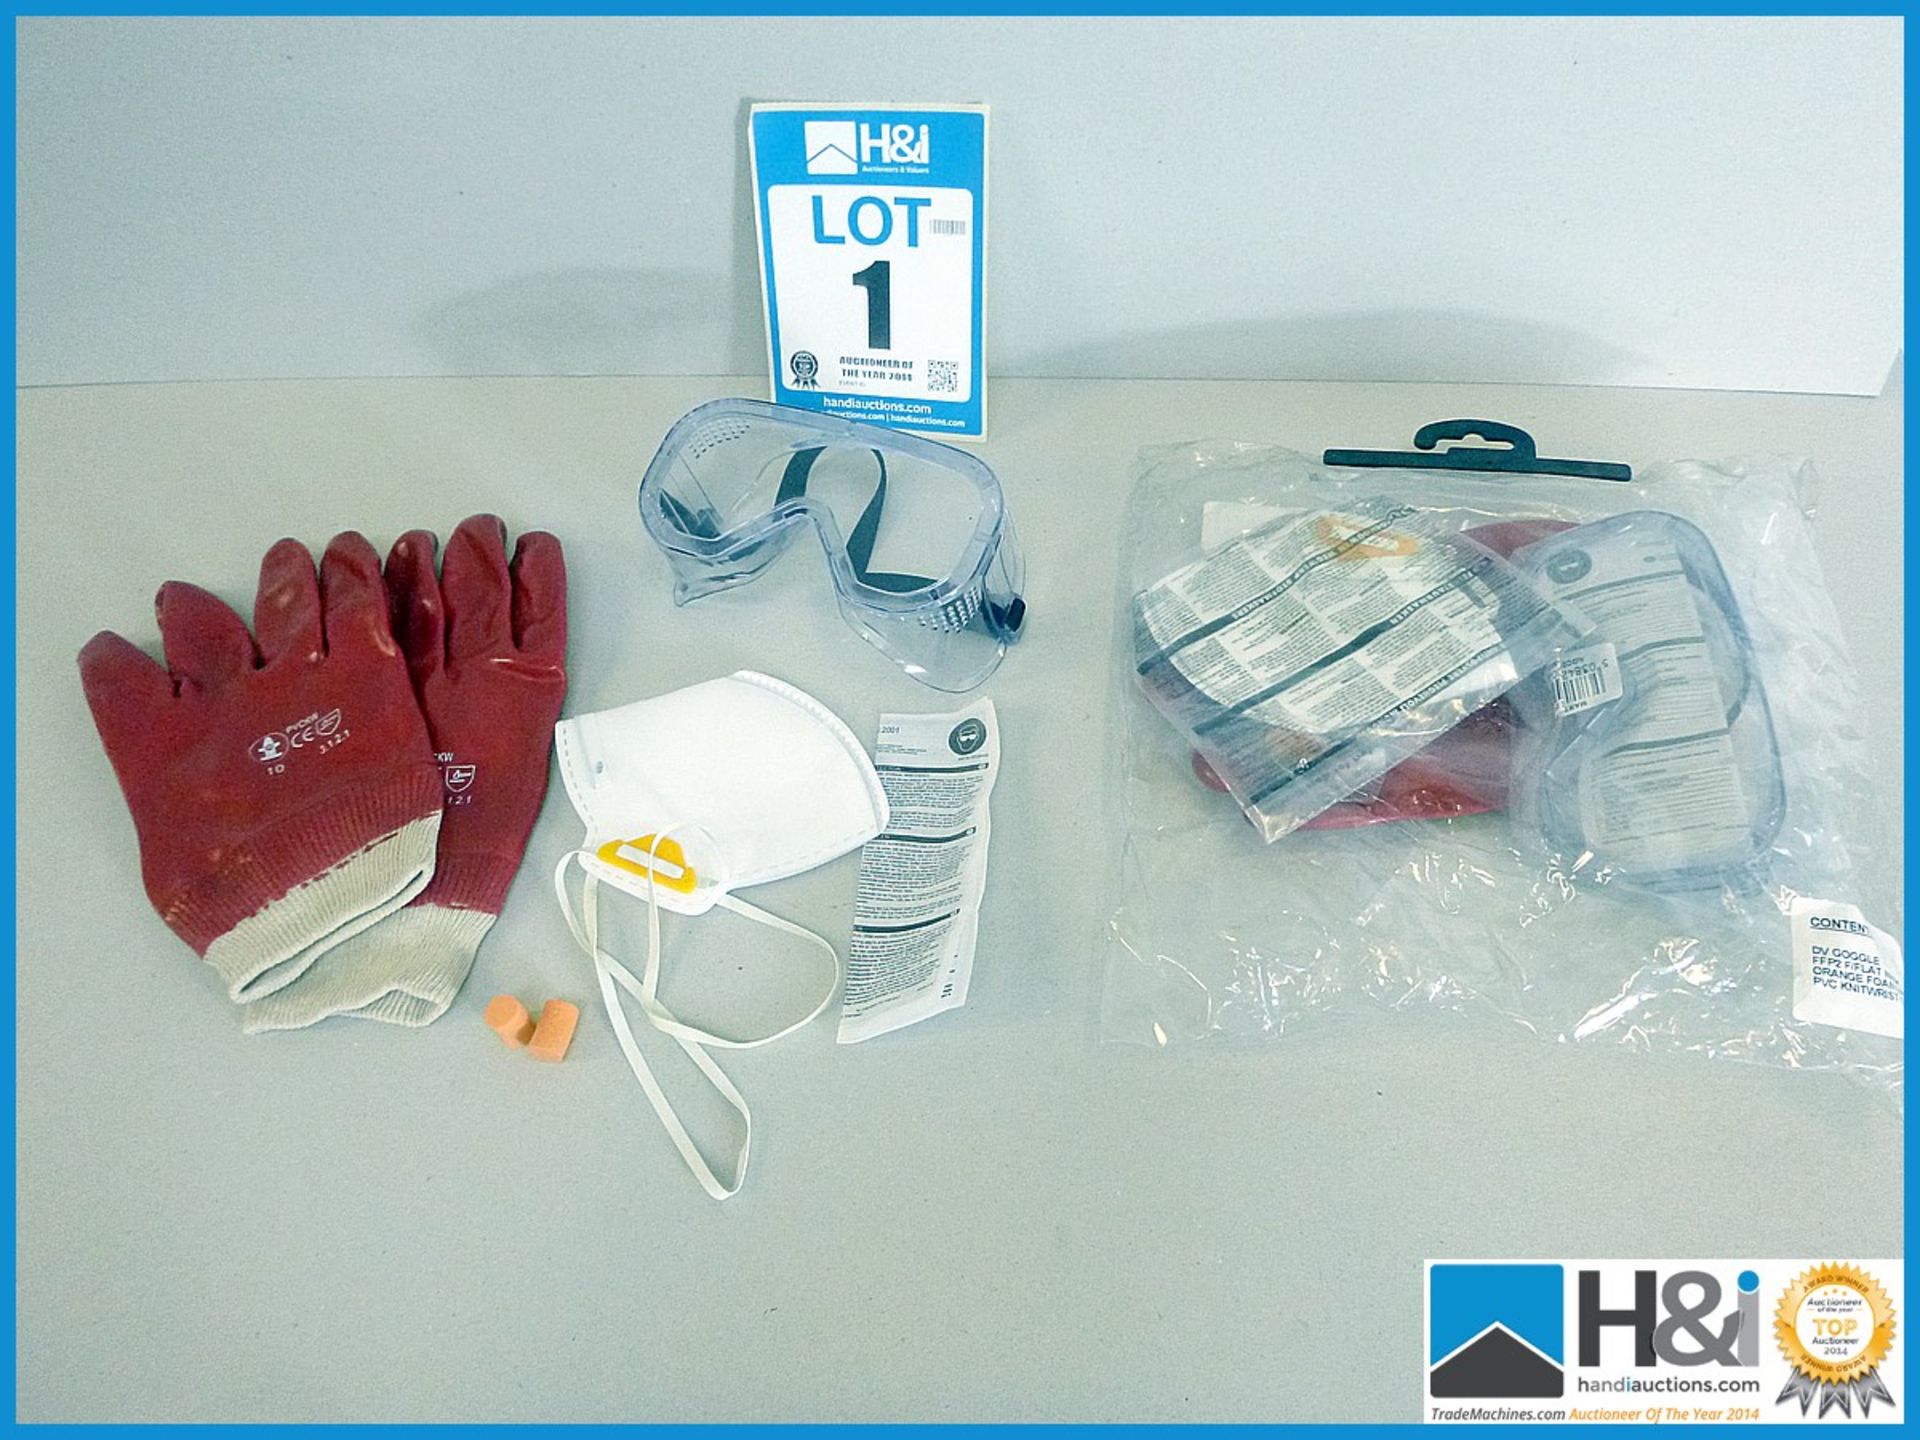 Safety set of ppe equipment including gloves goggles ear plugs X 16 lot value of £250 + vat.